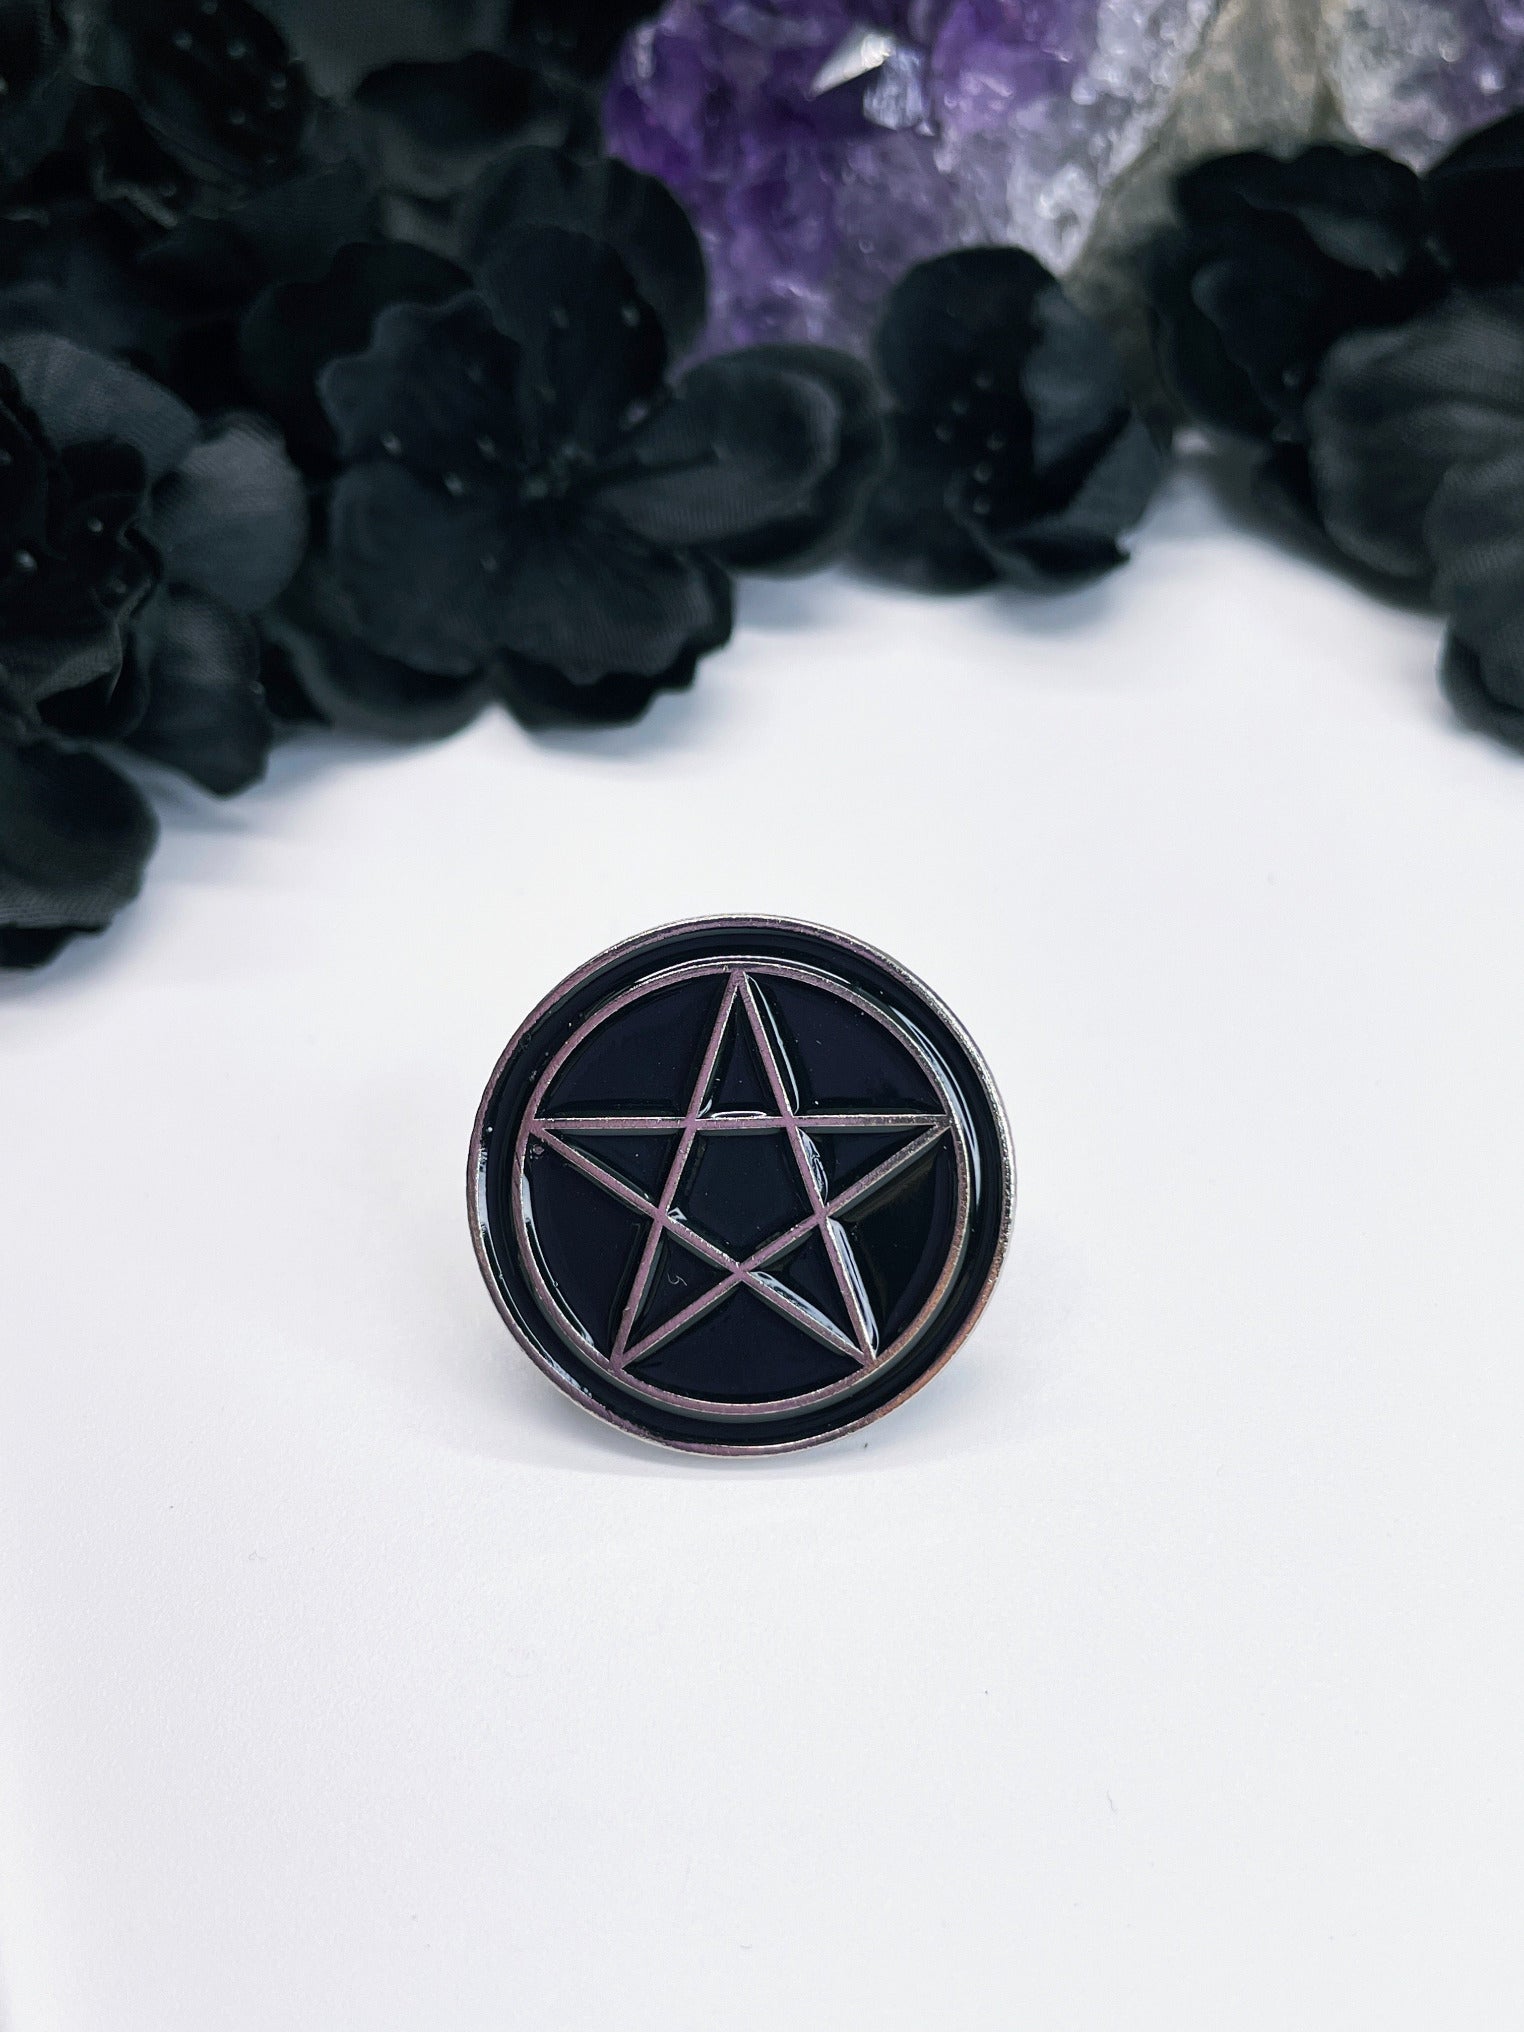 Pictured is an enamel pin of a pentagram